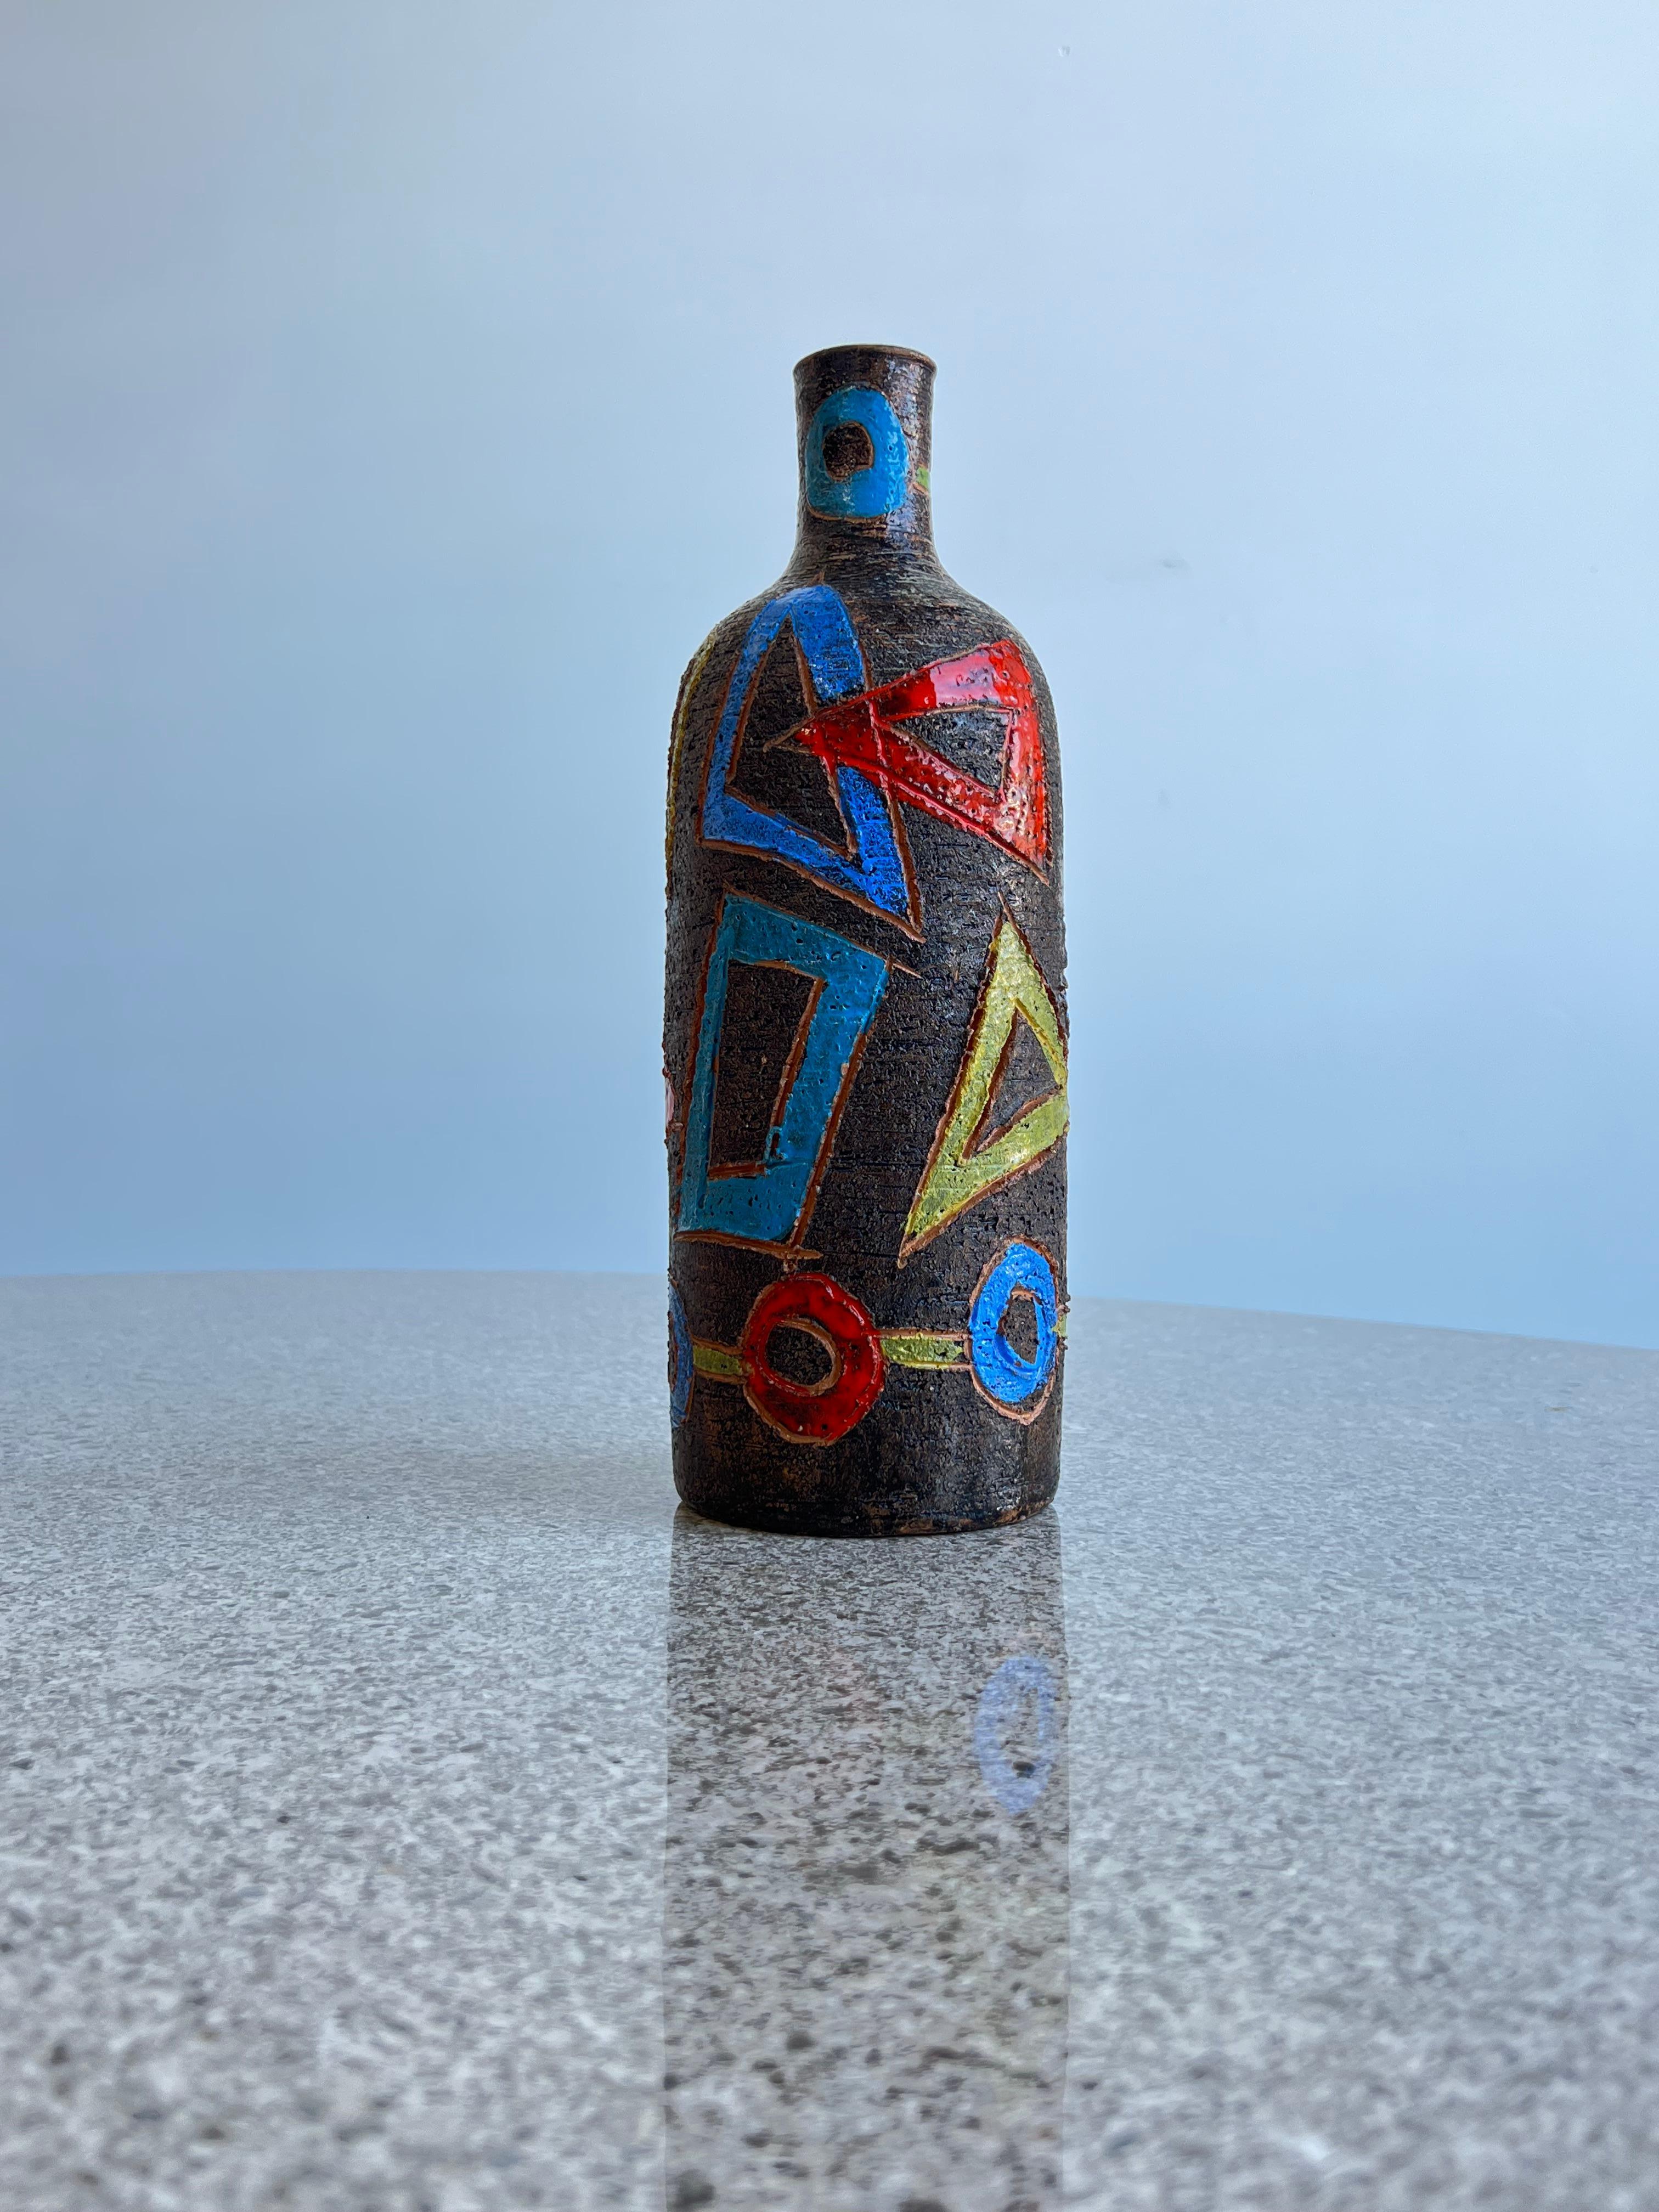 1960 Bitossi hand painted ceramic decorative bottle.
Stunning coulful ceramic by Bitossi, yellow, blue, green and red withy dark brown background with wrath texture ceramic surface.
Signed Italy on the bottom of the bottle. 
